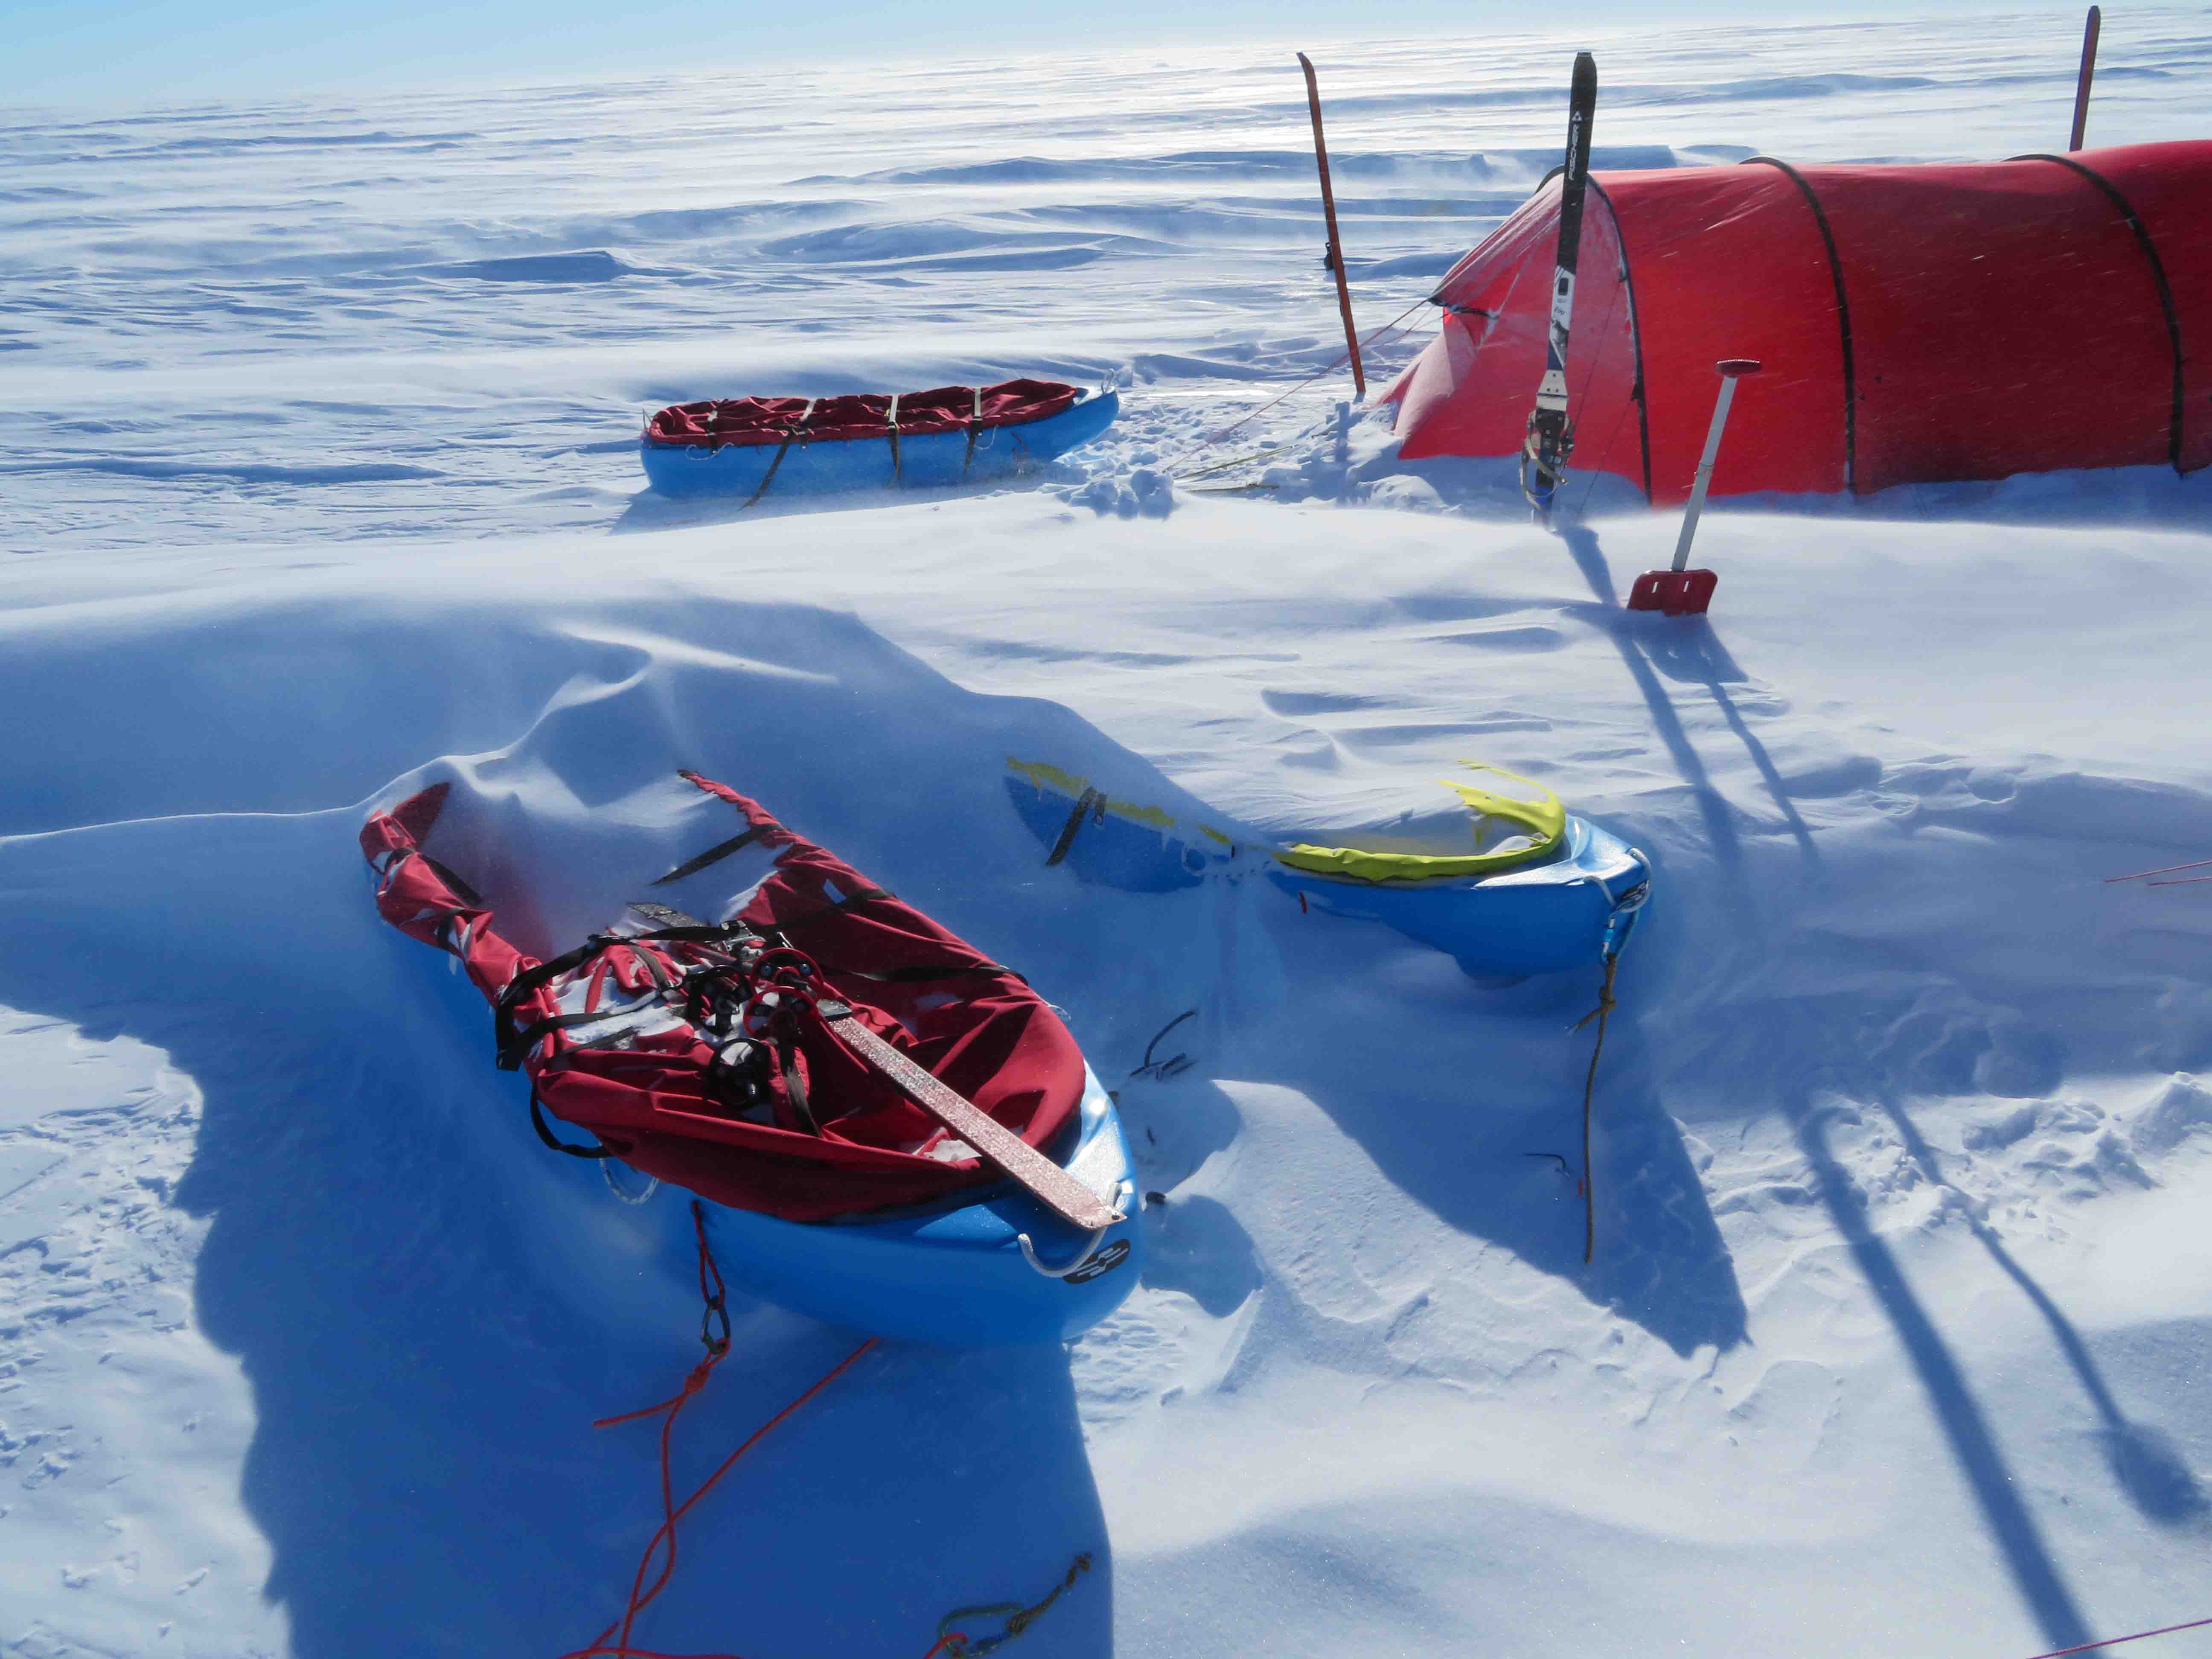 A Day in the Life of a South Pole Explorer